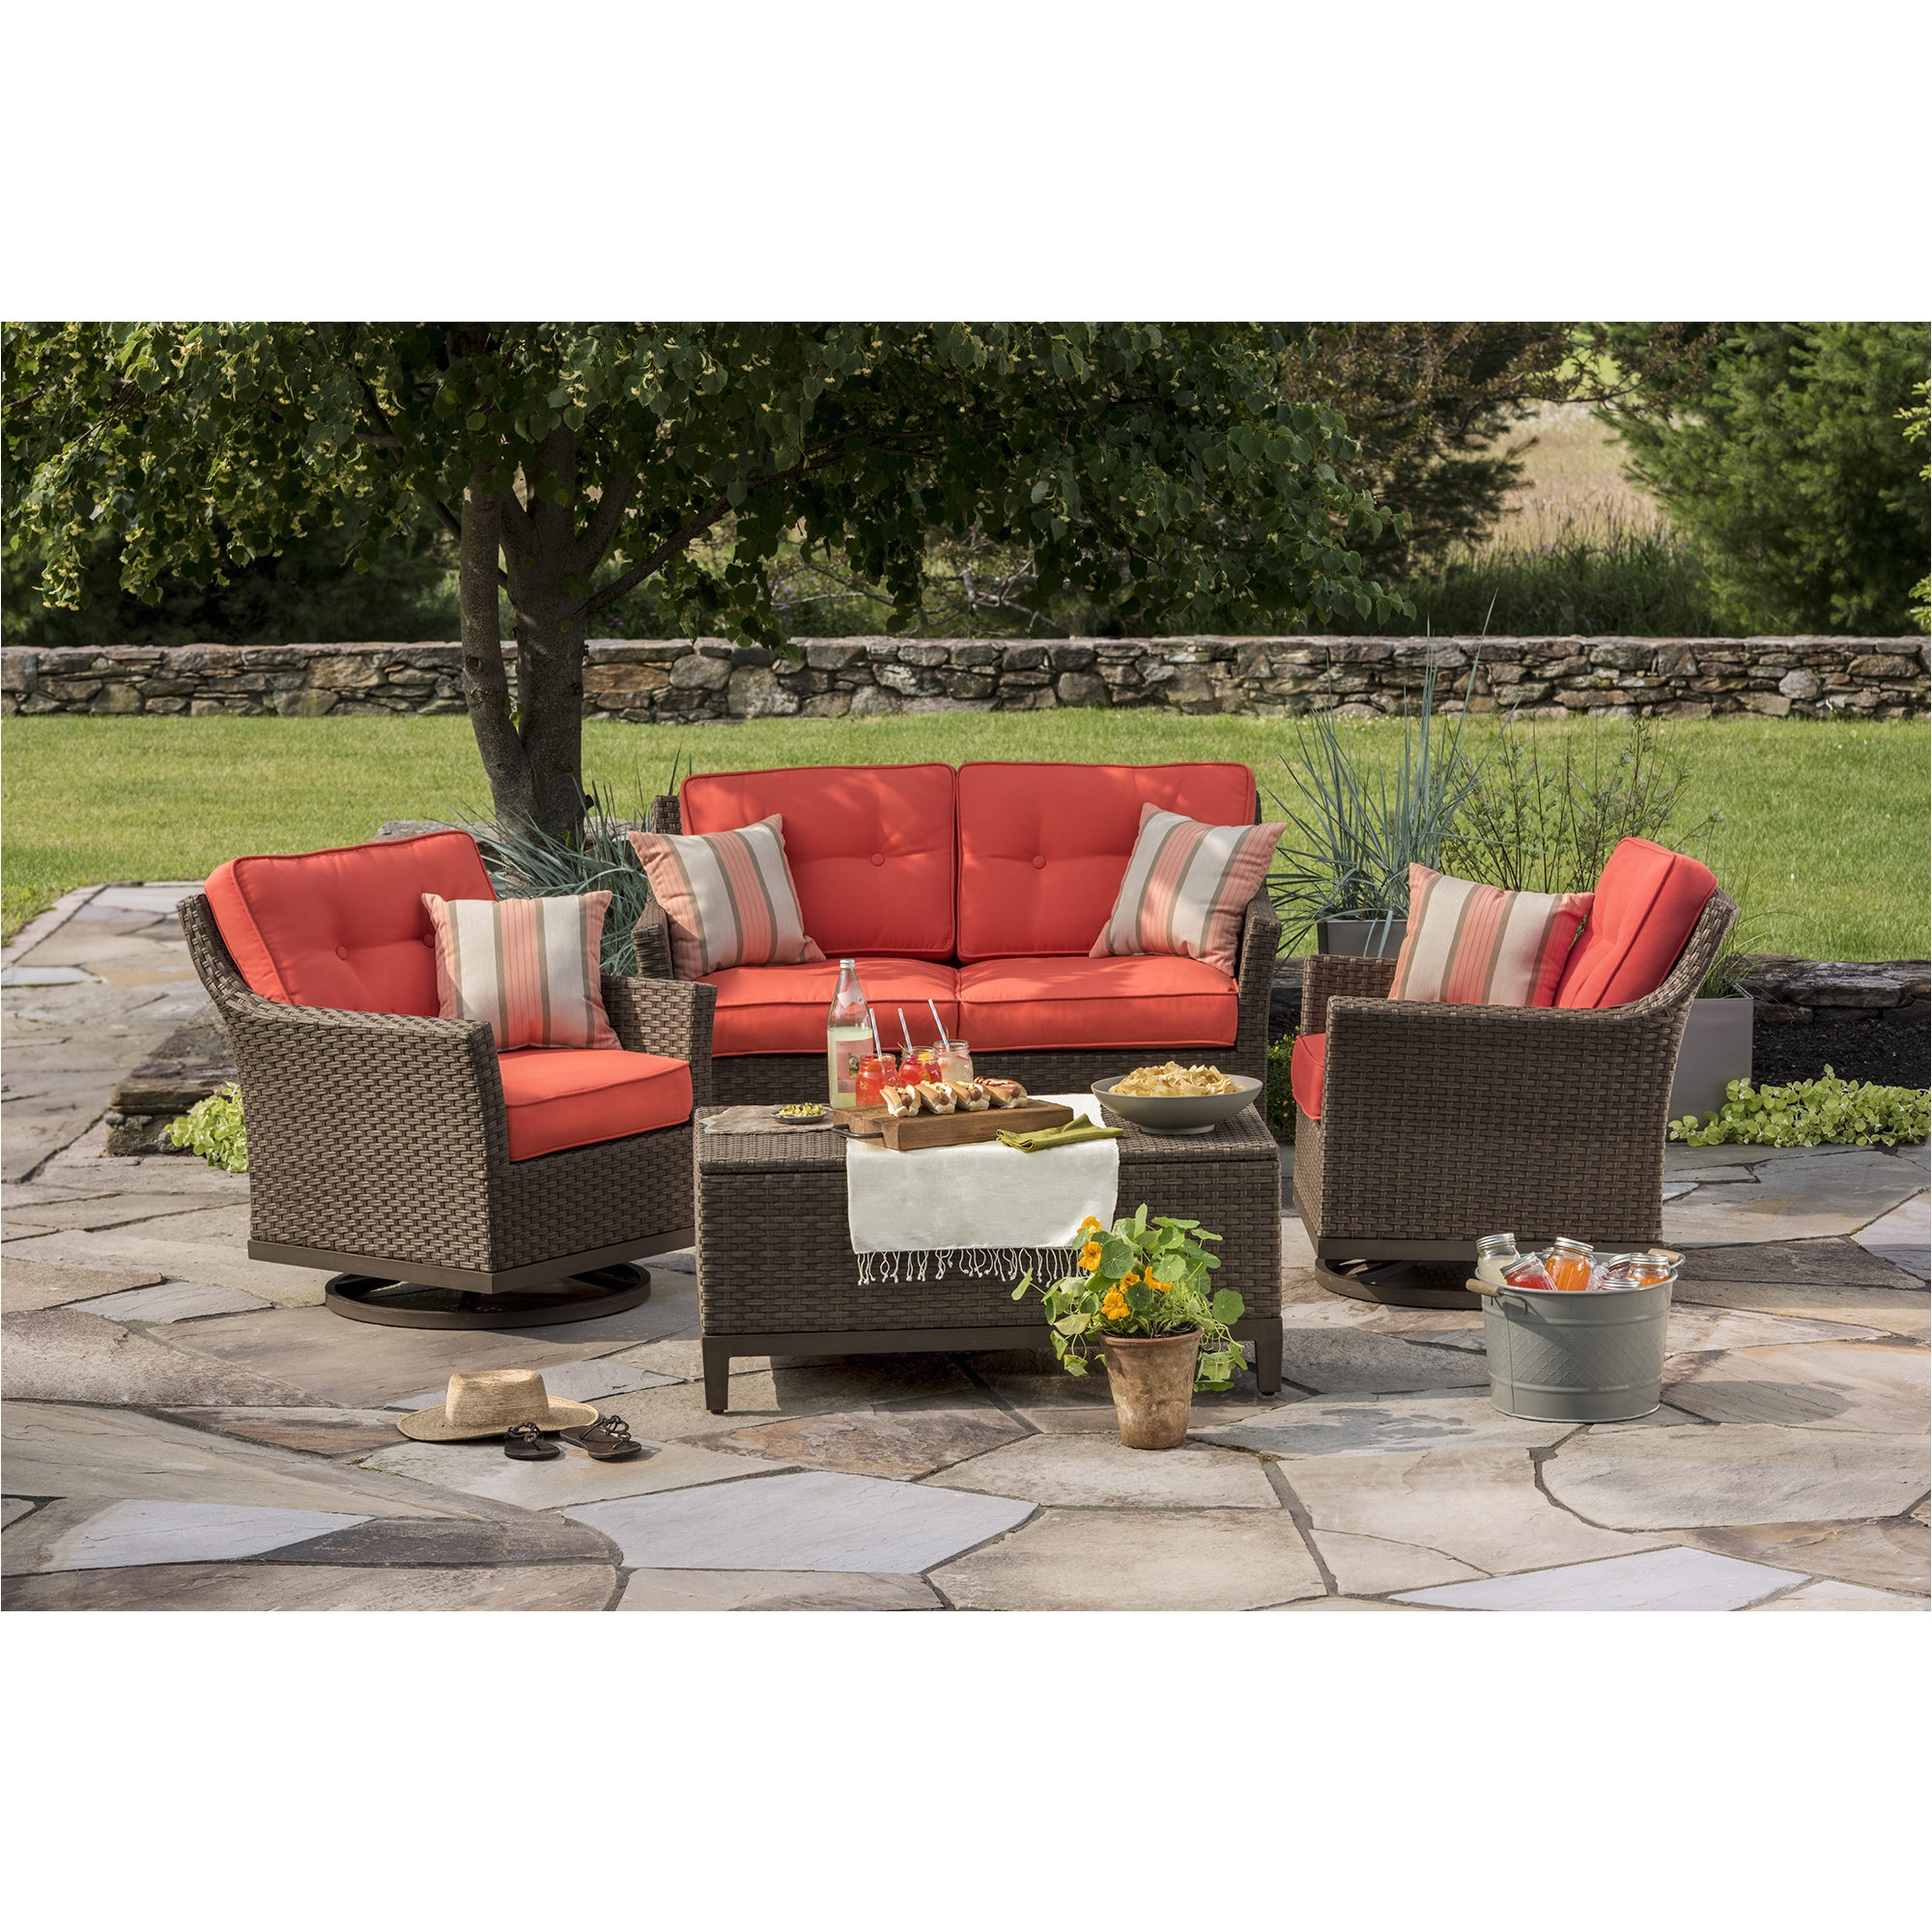 Backyard Tables and Chairs Engaging Patio Furniture Outlet 12 Raisen Outdoor Nassau County